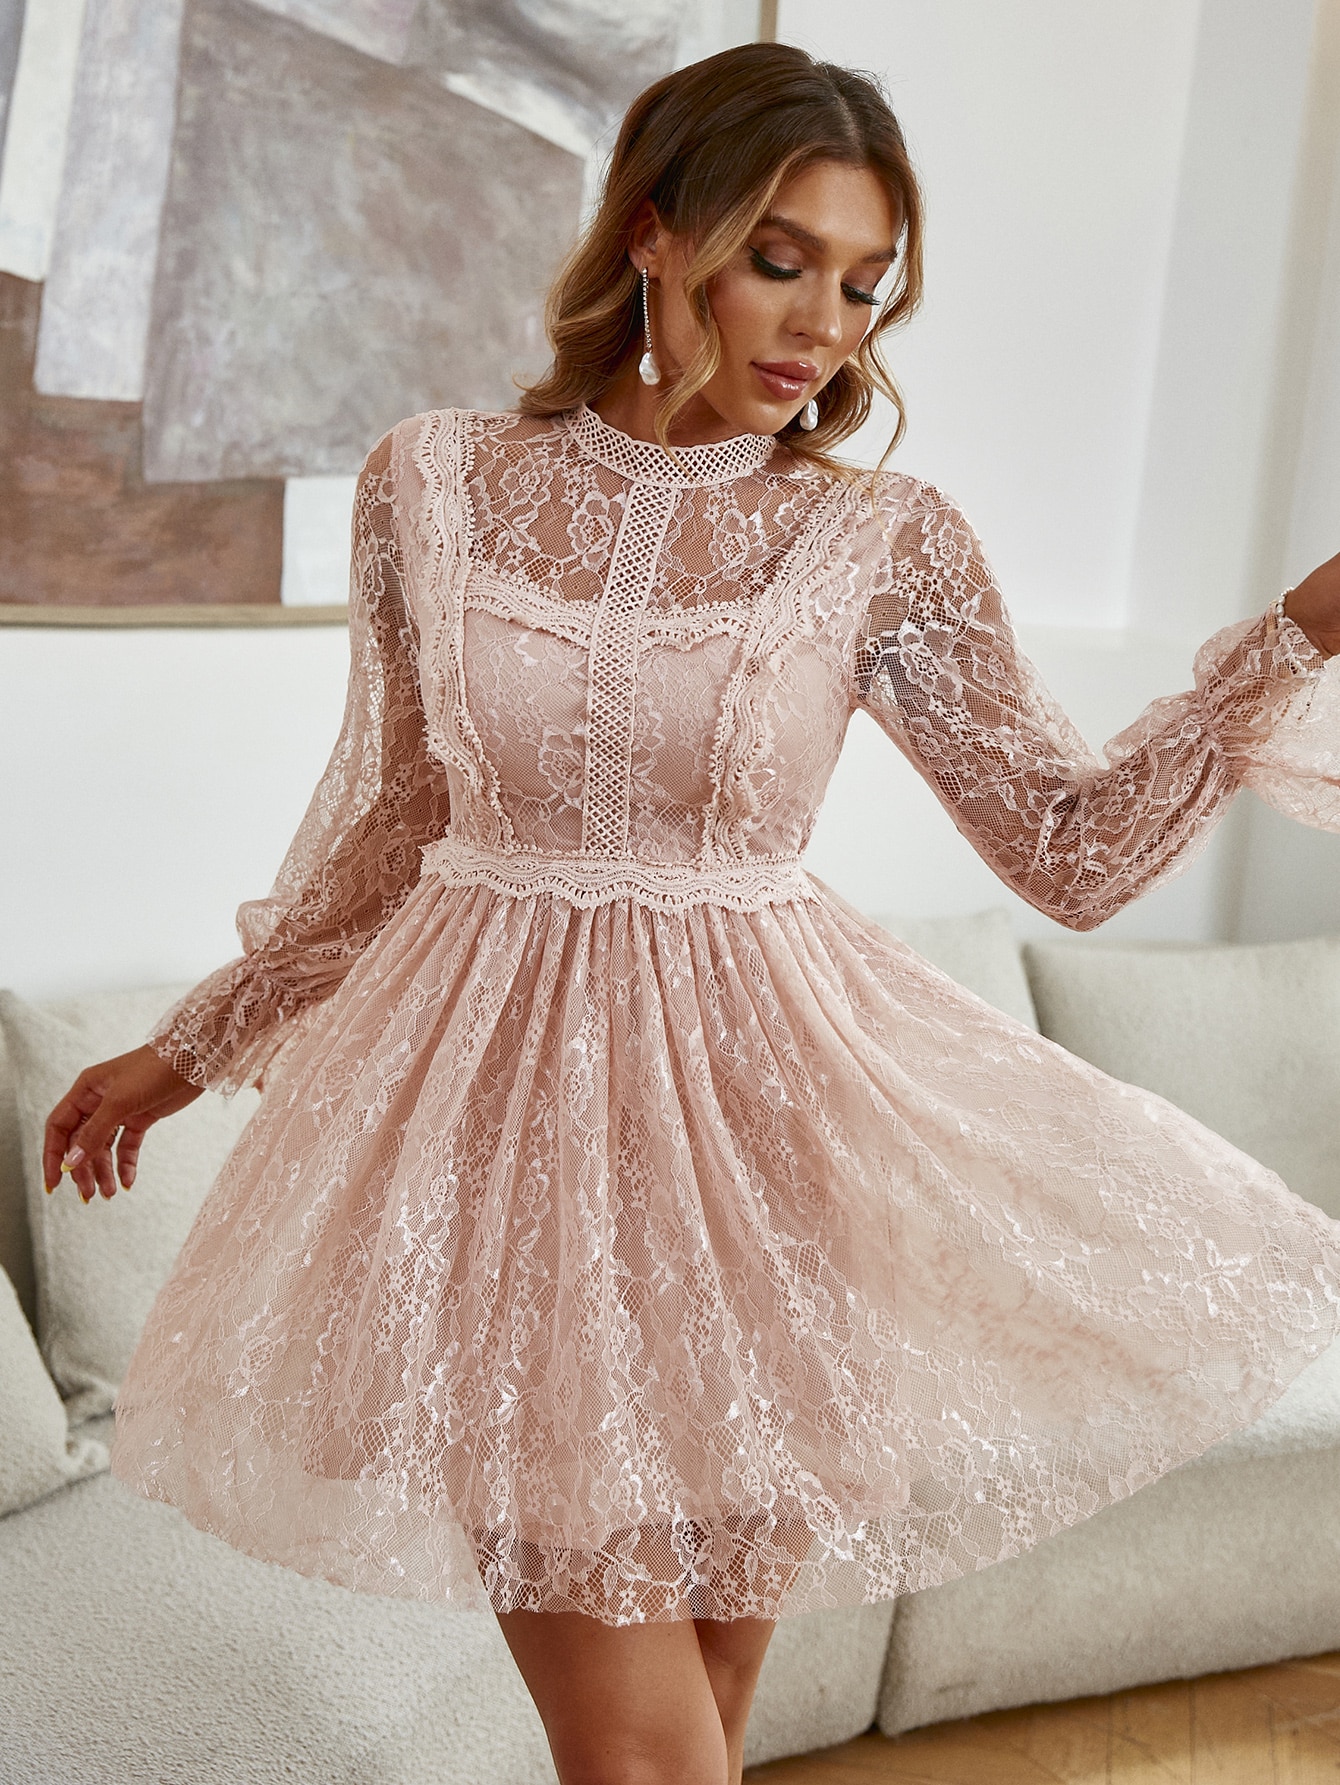 Simplee-Sexy-lace-tulle-elegant-wedding-party-dress-women-summer-Ruffle-evening-pink-mini-robe-Long-1